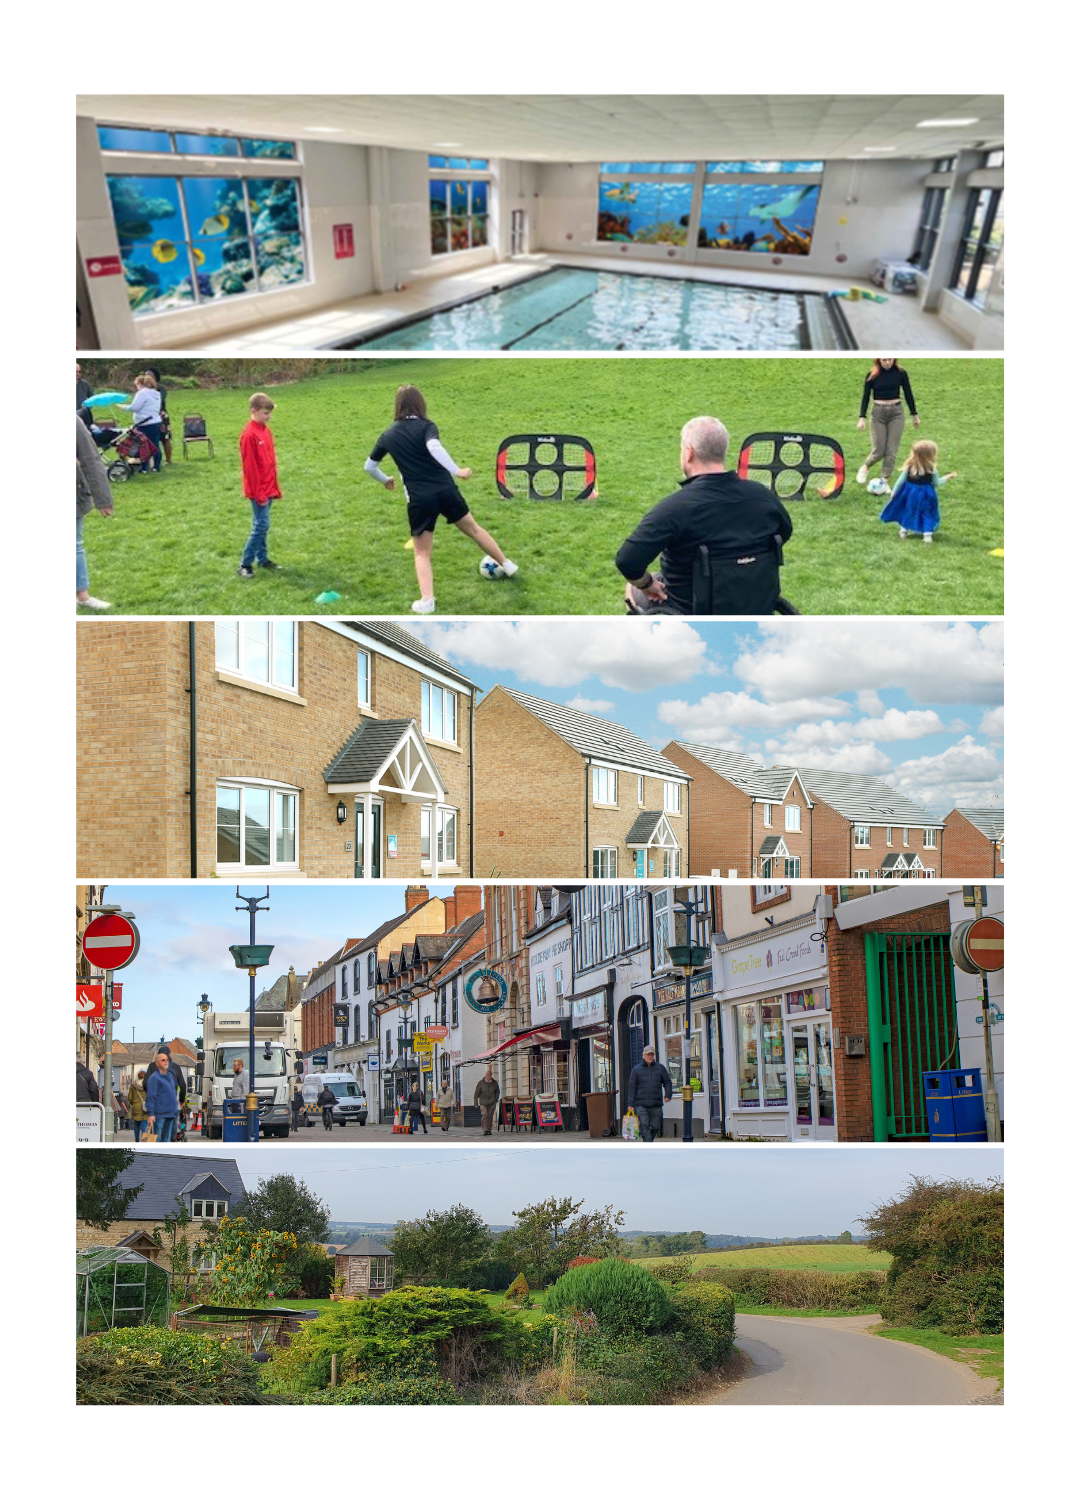 Vision '36 showcasing a swimming pool, youth sports activities, housing, Melton Mowbray Town Centre and rural village